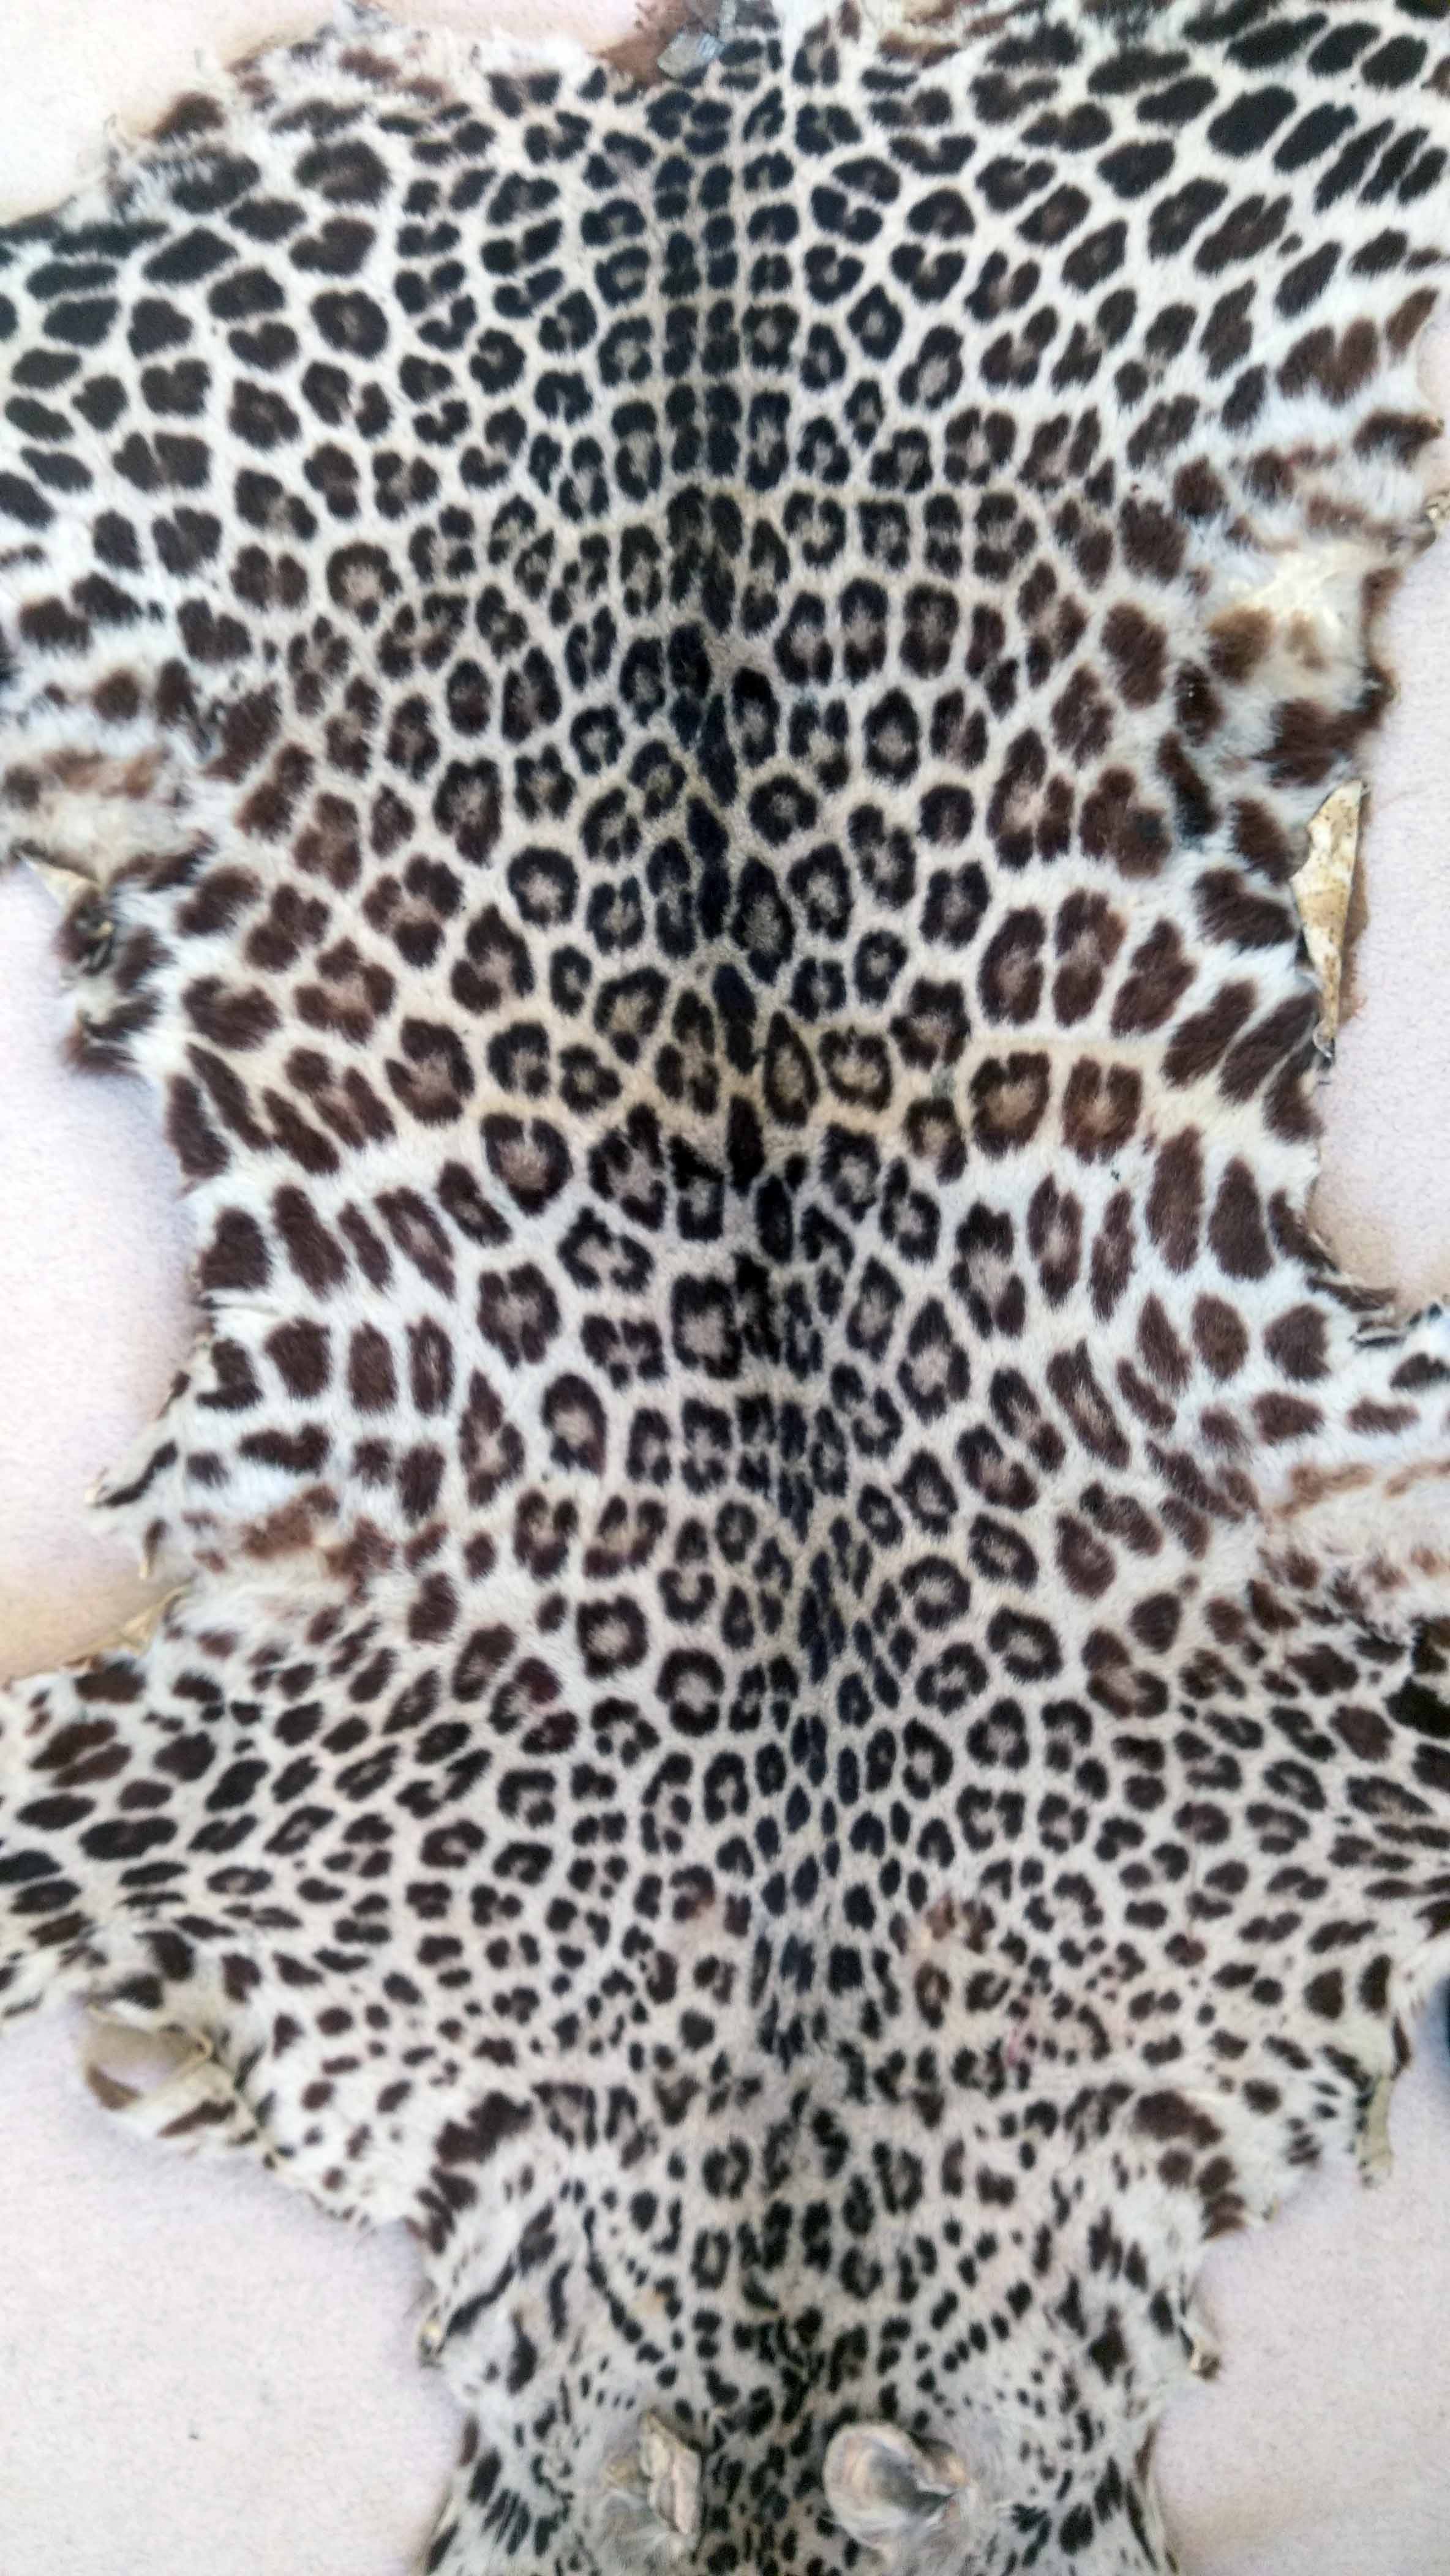 An Antique Circa 19th Century Leopard Skin. - Image 5 of 6